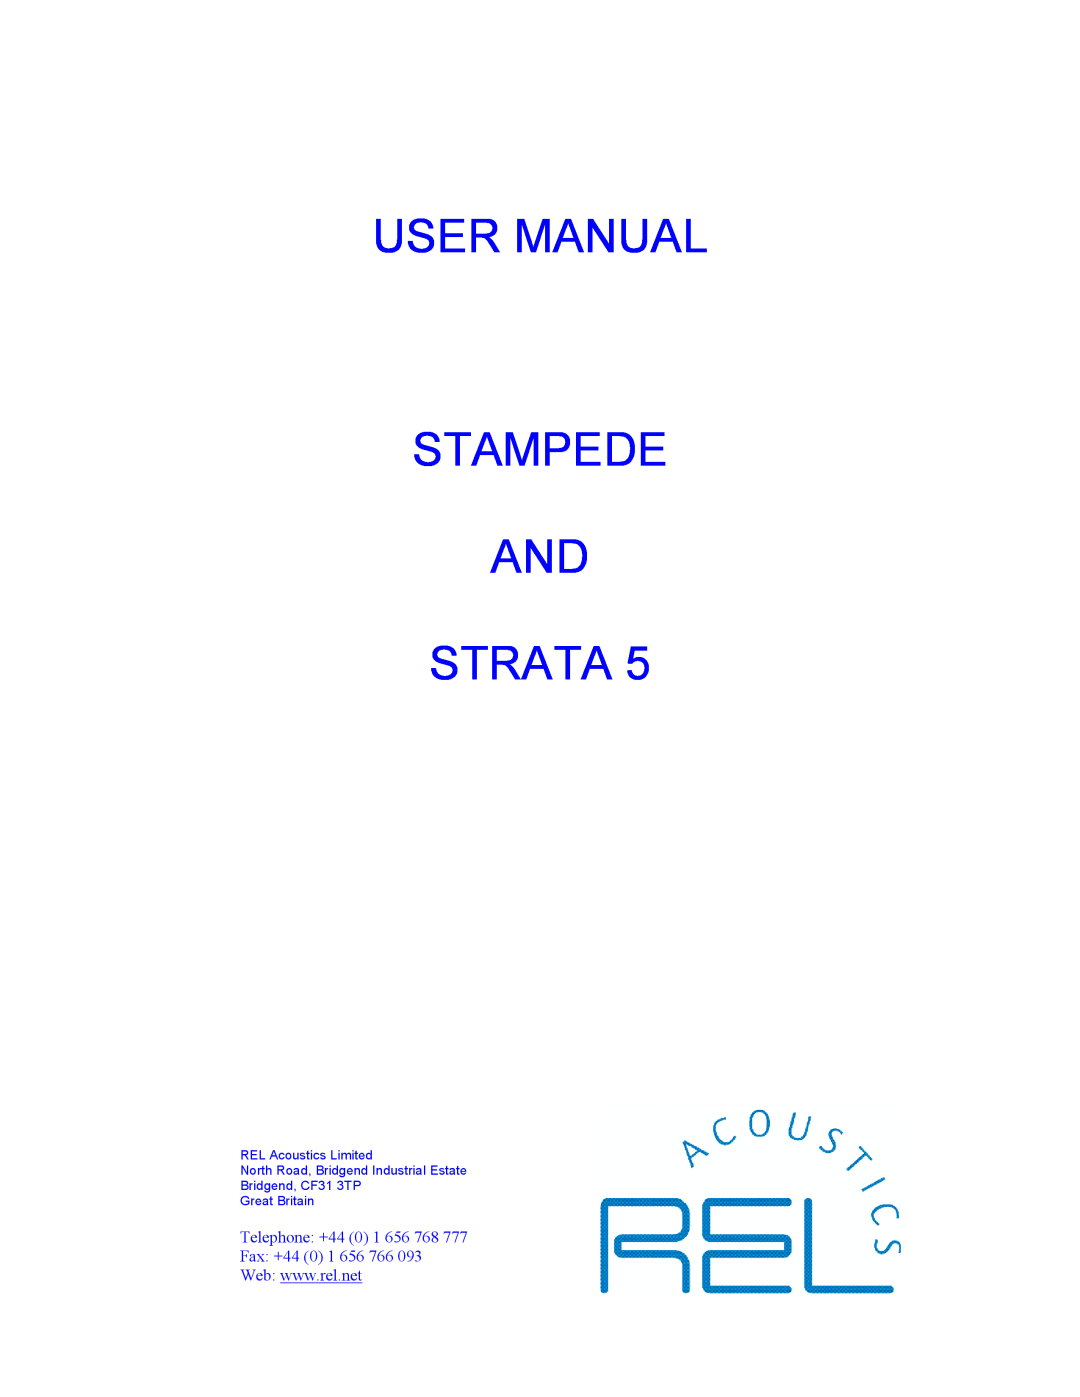 REL Acoustics Stampede, Strata 5 user manual Telephone +44 0 1 656 768 Fax +44, REL Acoustics Limited 